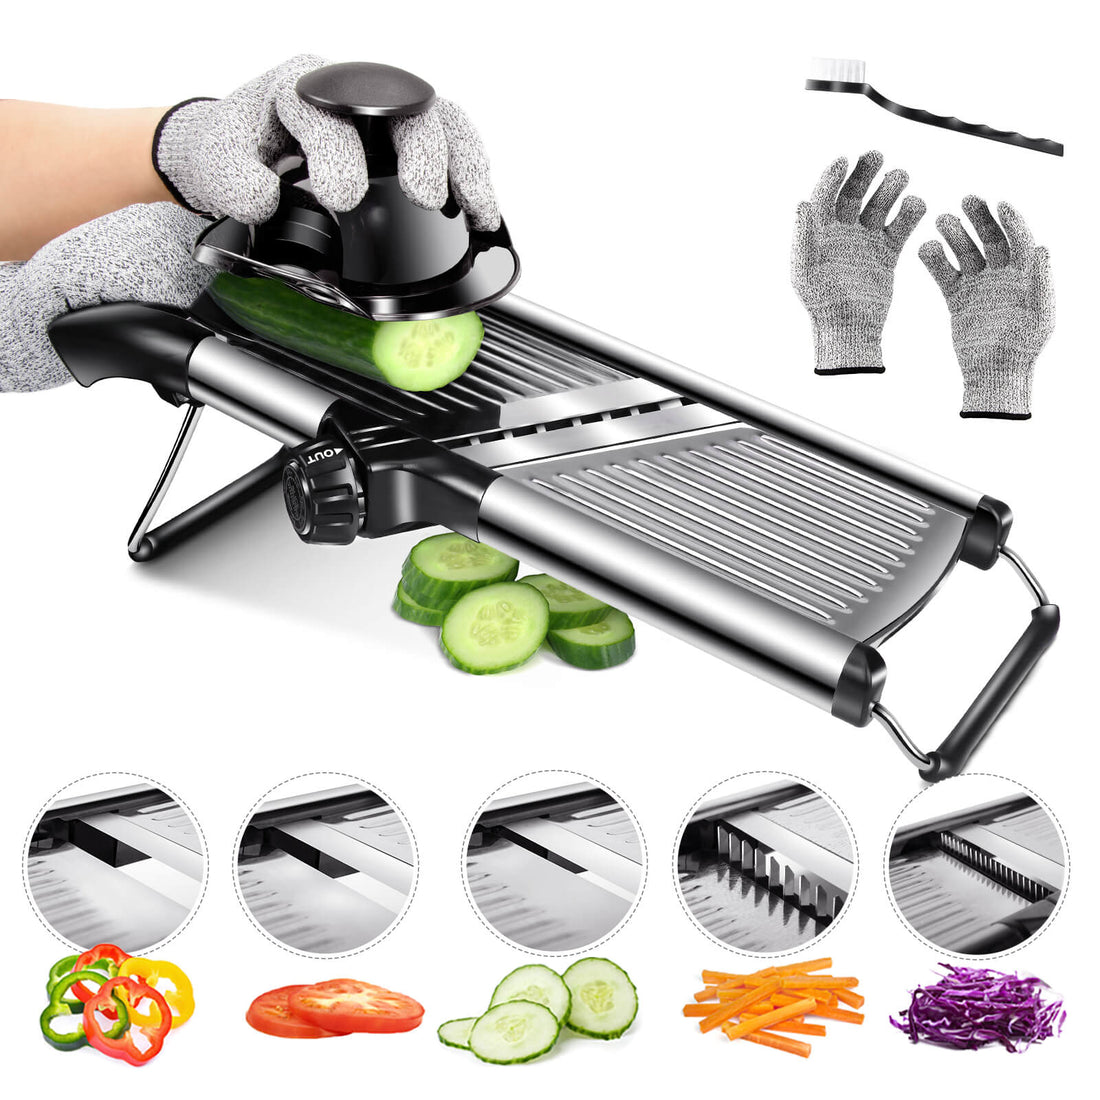 Rotary Cheese Grater Shredder with Handle, GRABADO 5 in 1 Stainless Steel  Multifunctional Vegetable Cutter & Slicer,Manual Grater Rotary for Fruit  and